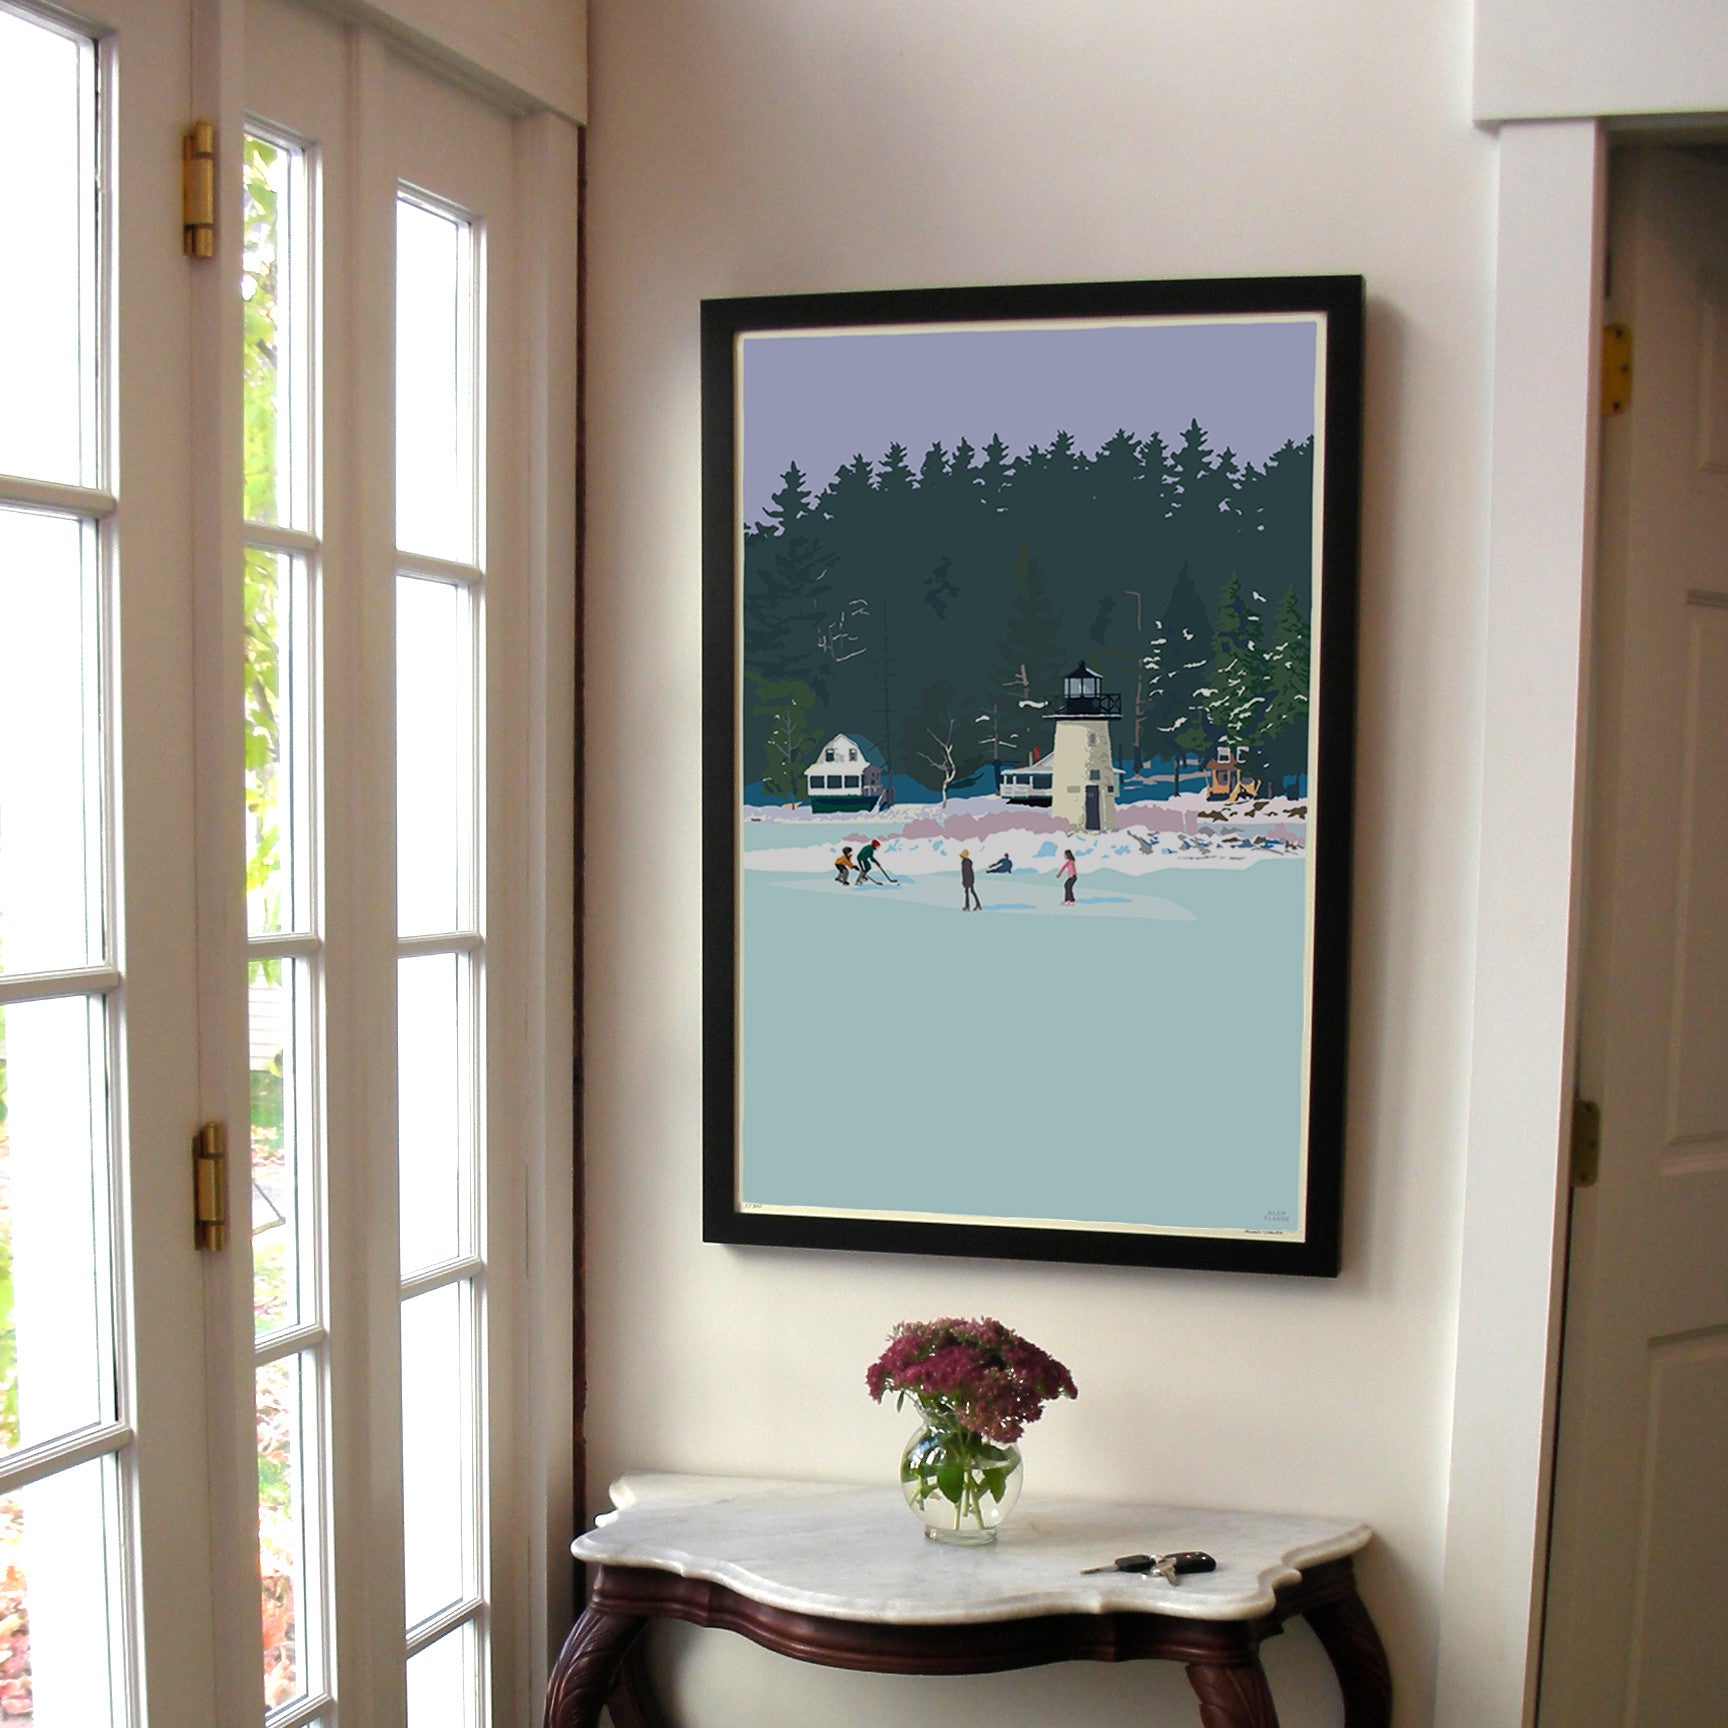 Ice Skating At Ladies Delight Lighthouse Art Print 24" x 36" Framed Wall Poster By Alan Claude  - Maine